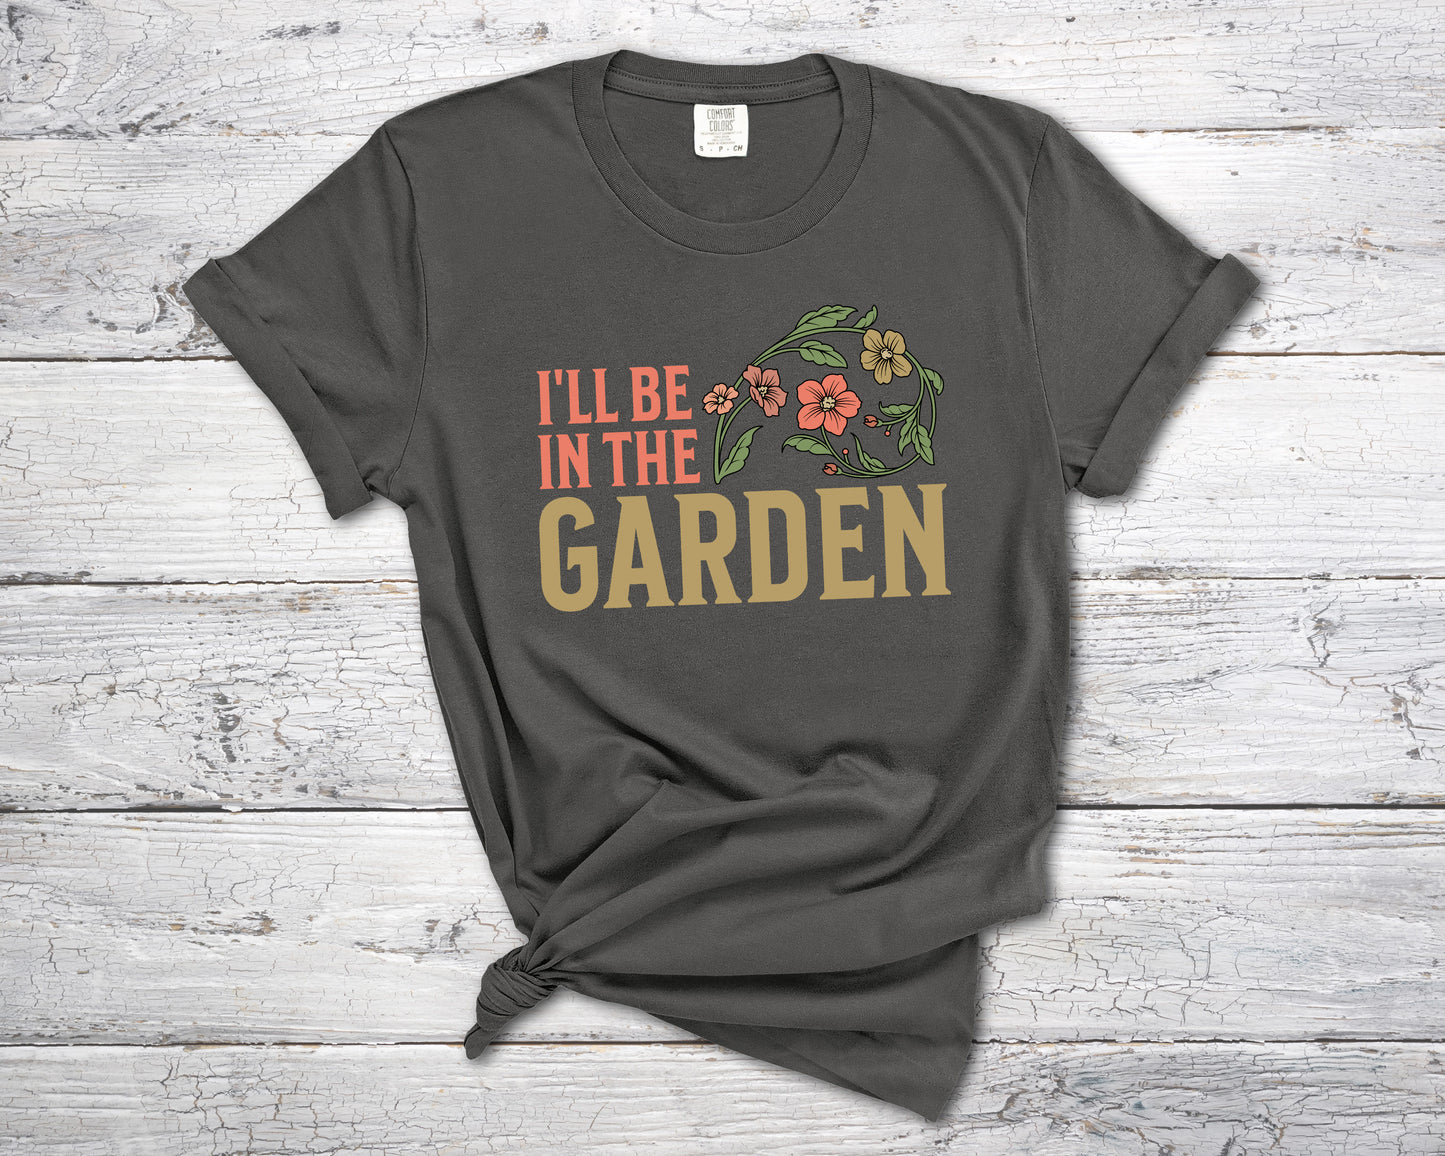 Floral Gardening Comfort Colors T-shirt for ladies who love gardening-T-Shirts-PureDesignTees